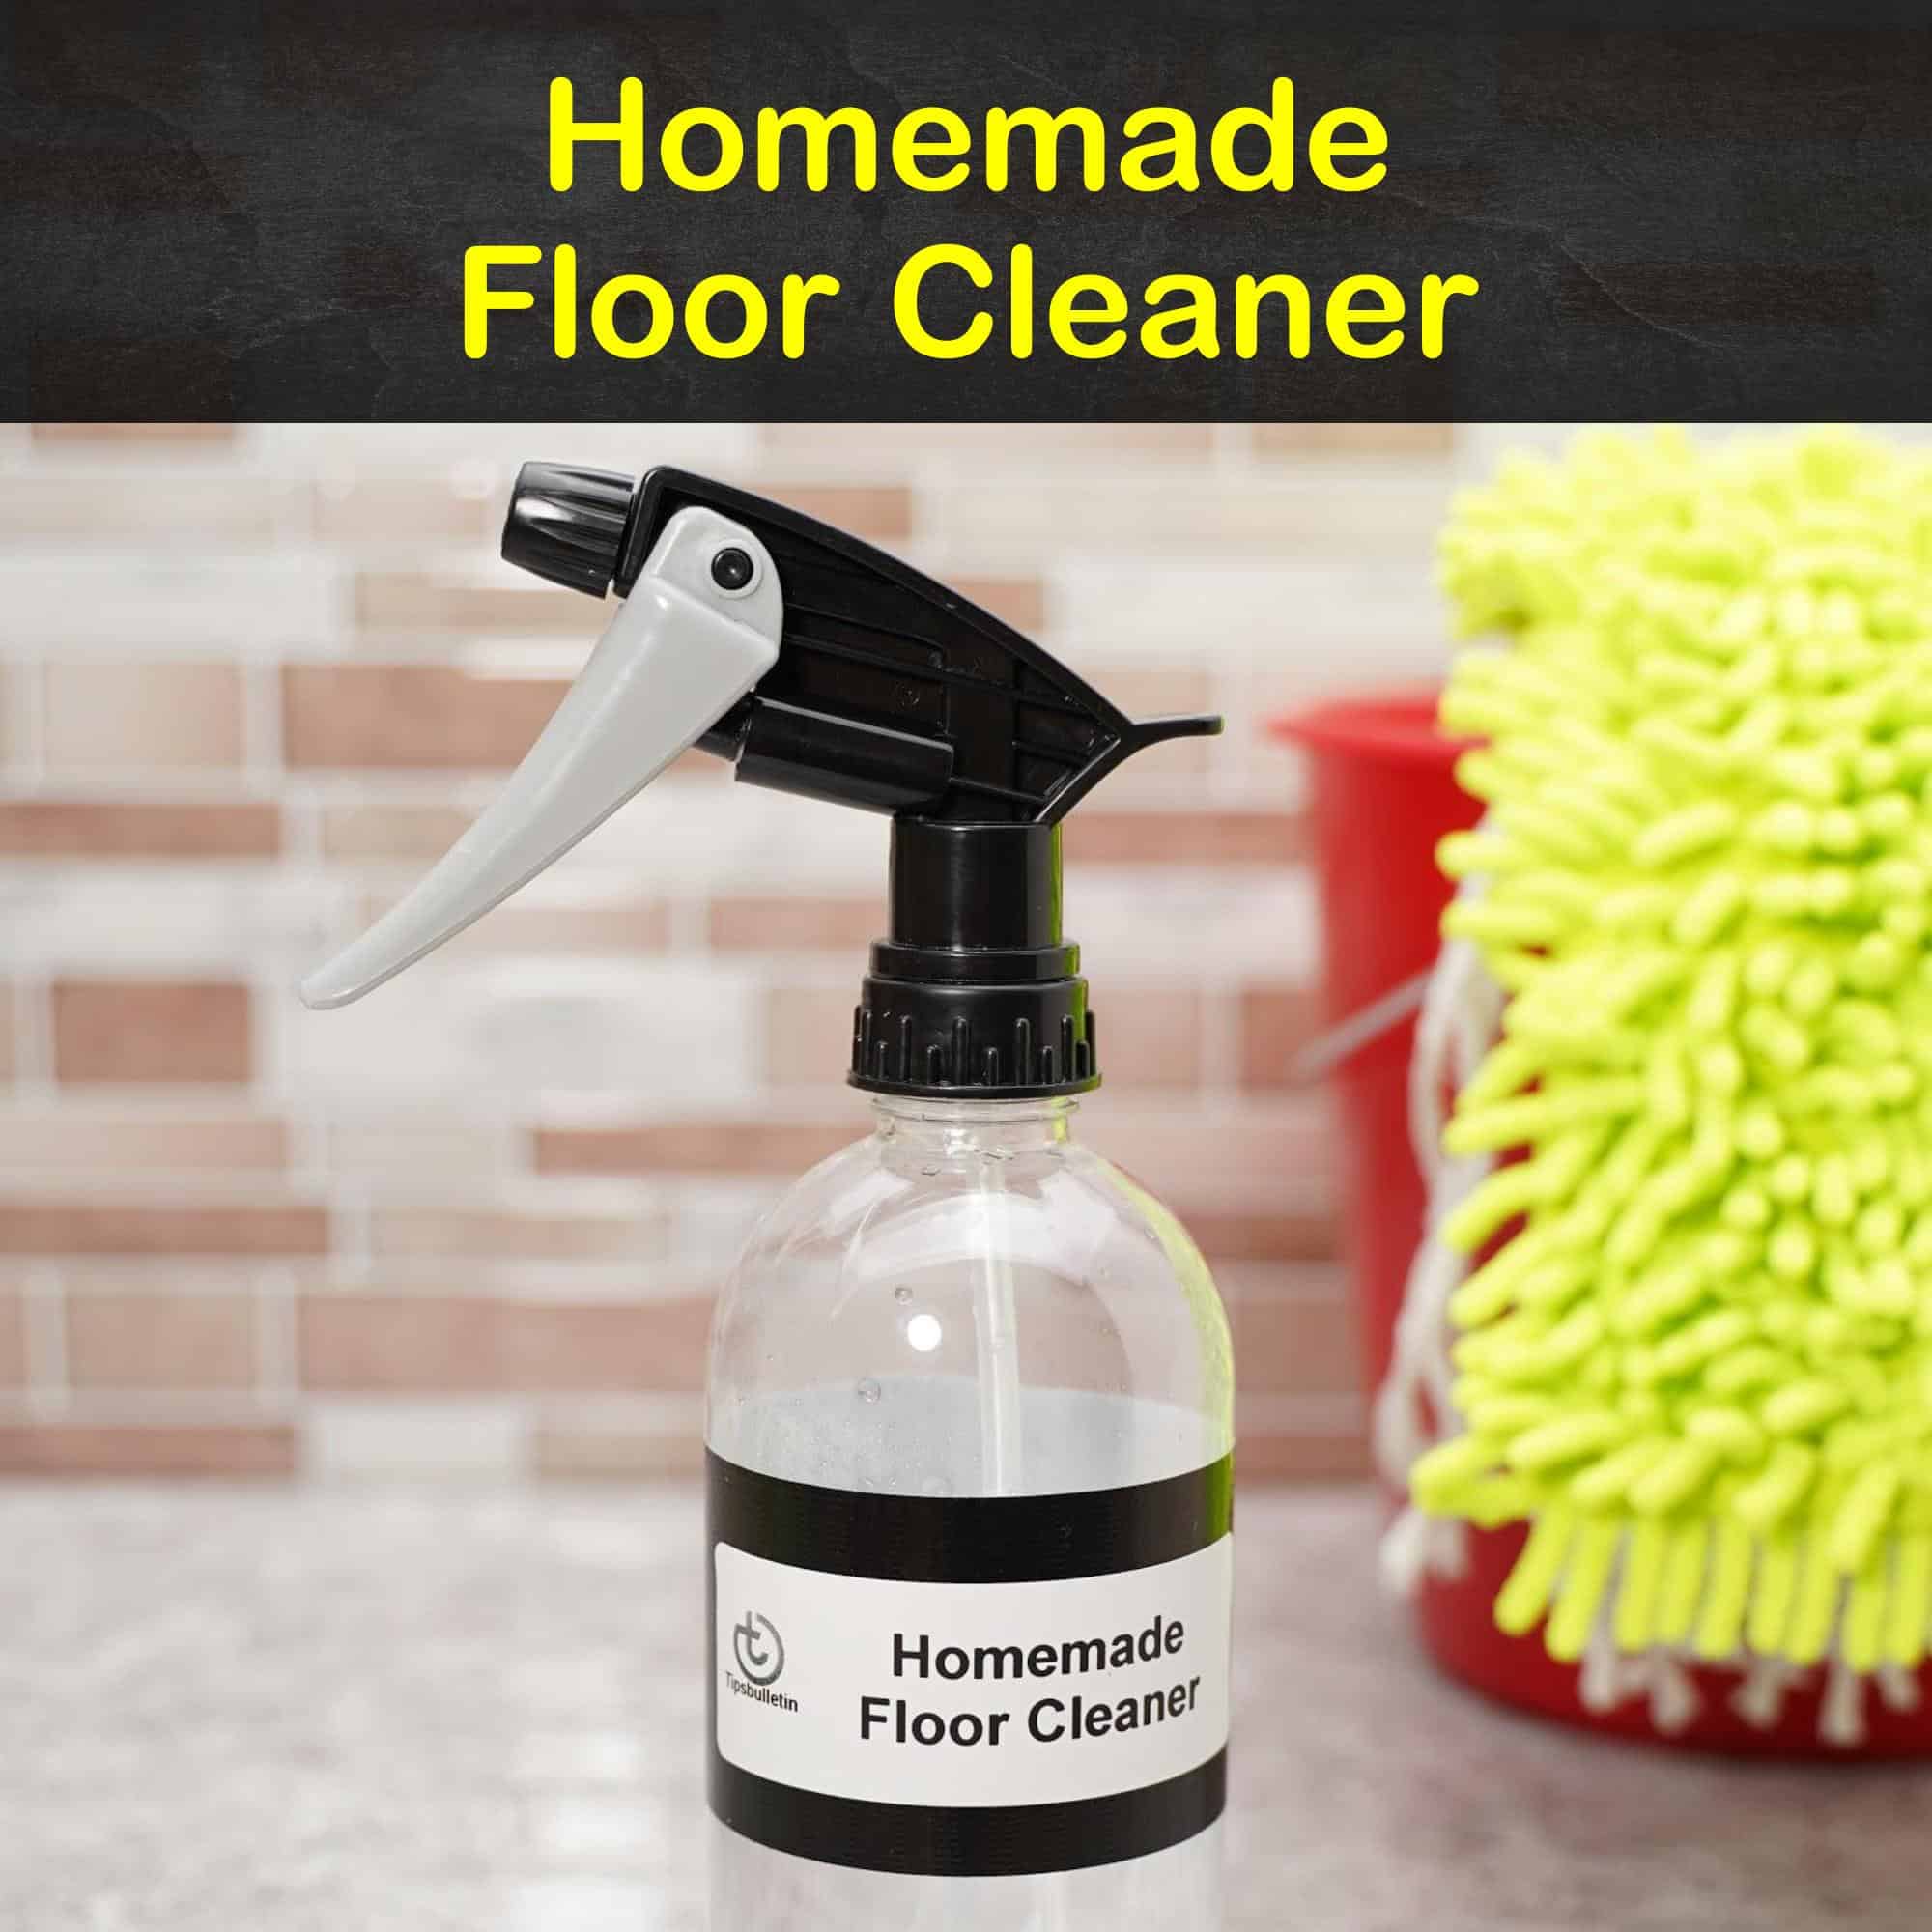 6 Homemade Floor Cleaner Recipes – How to Clean Your Floors